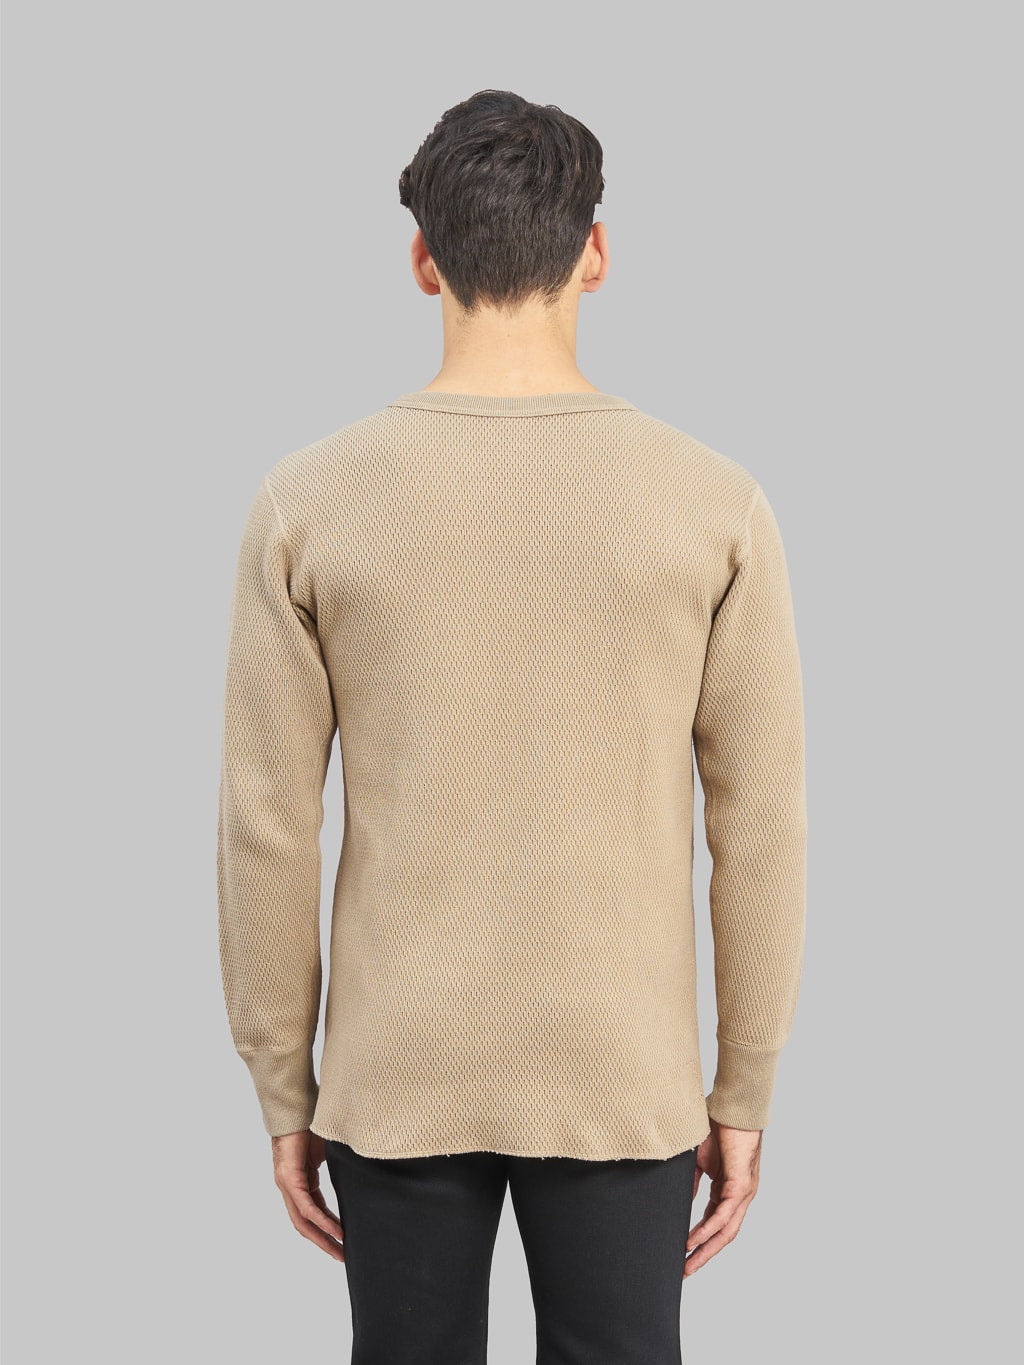 UES Double Honeycomb Thermal TShirt beige model back fit